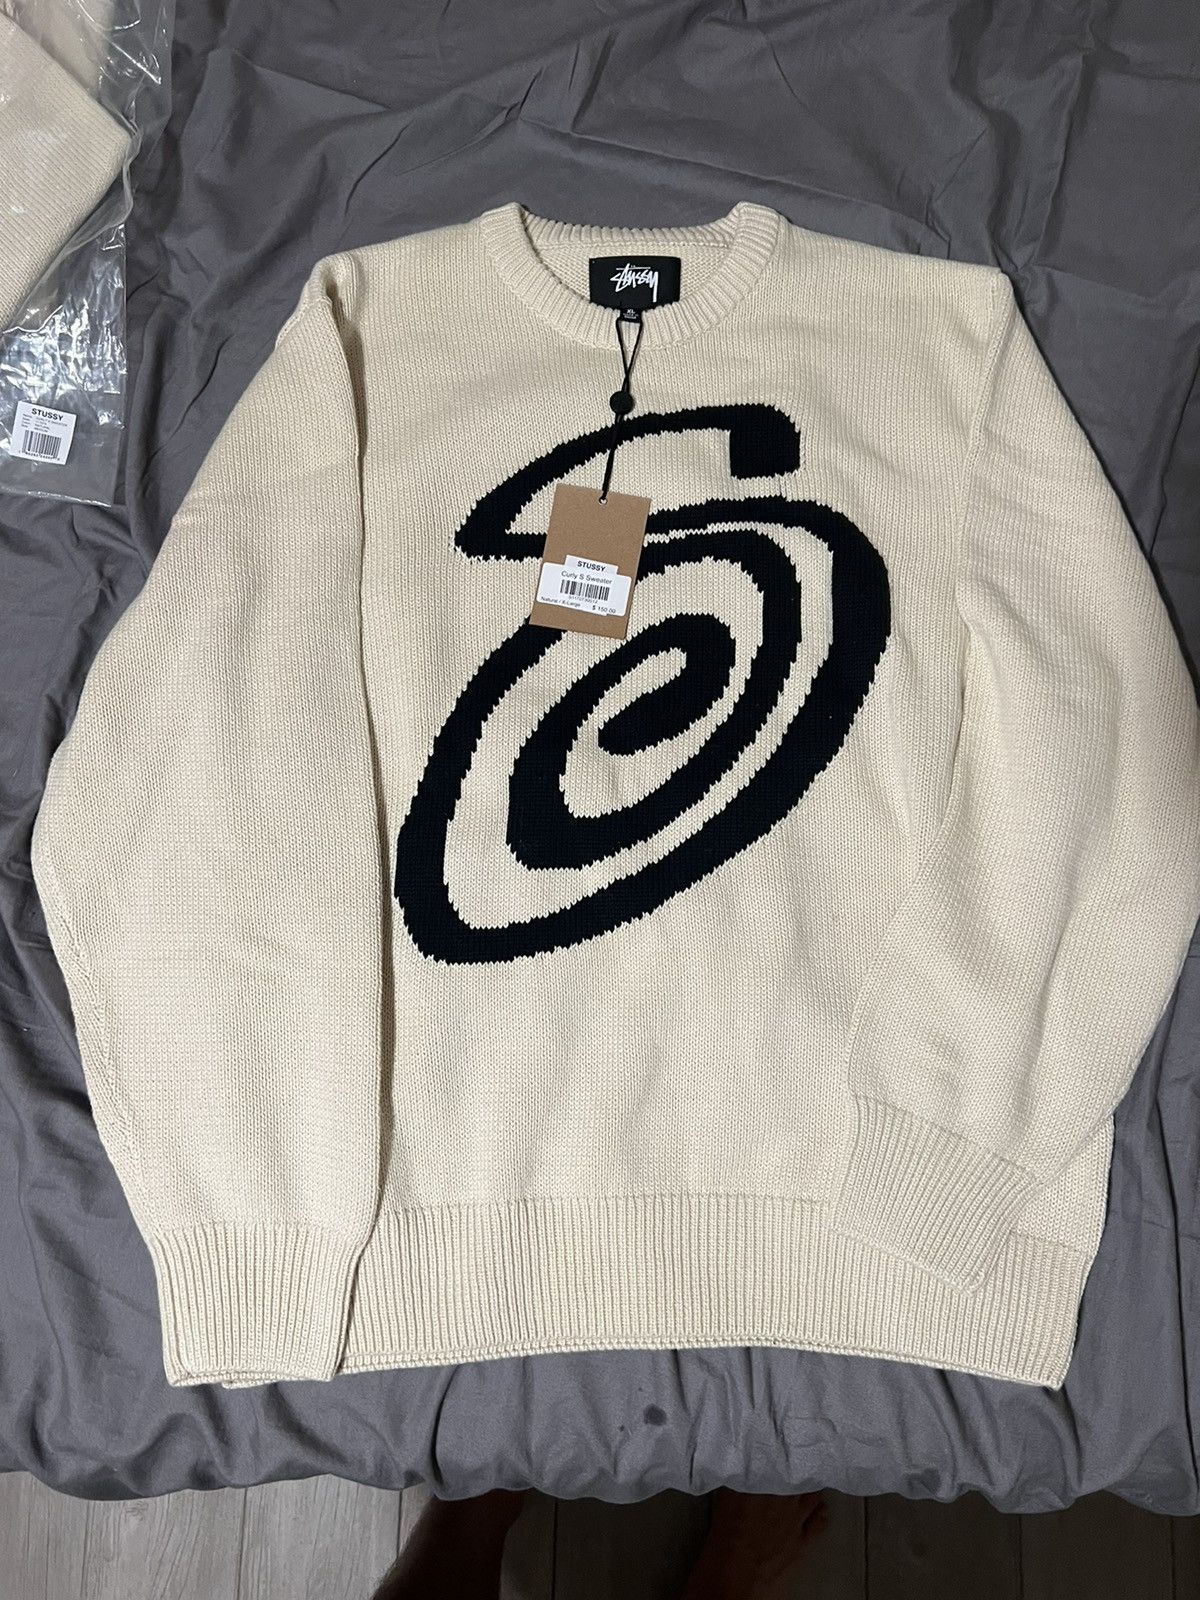 Stussy Stussy Curly S Knit “Natural” Sweater Size XL Fall 2022